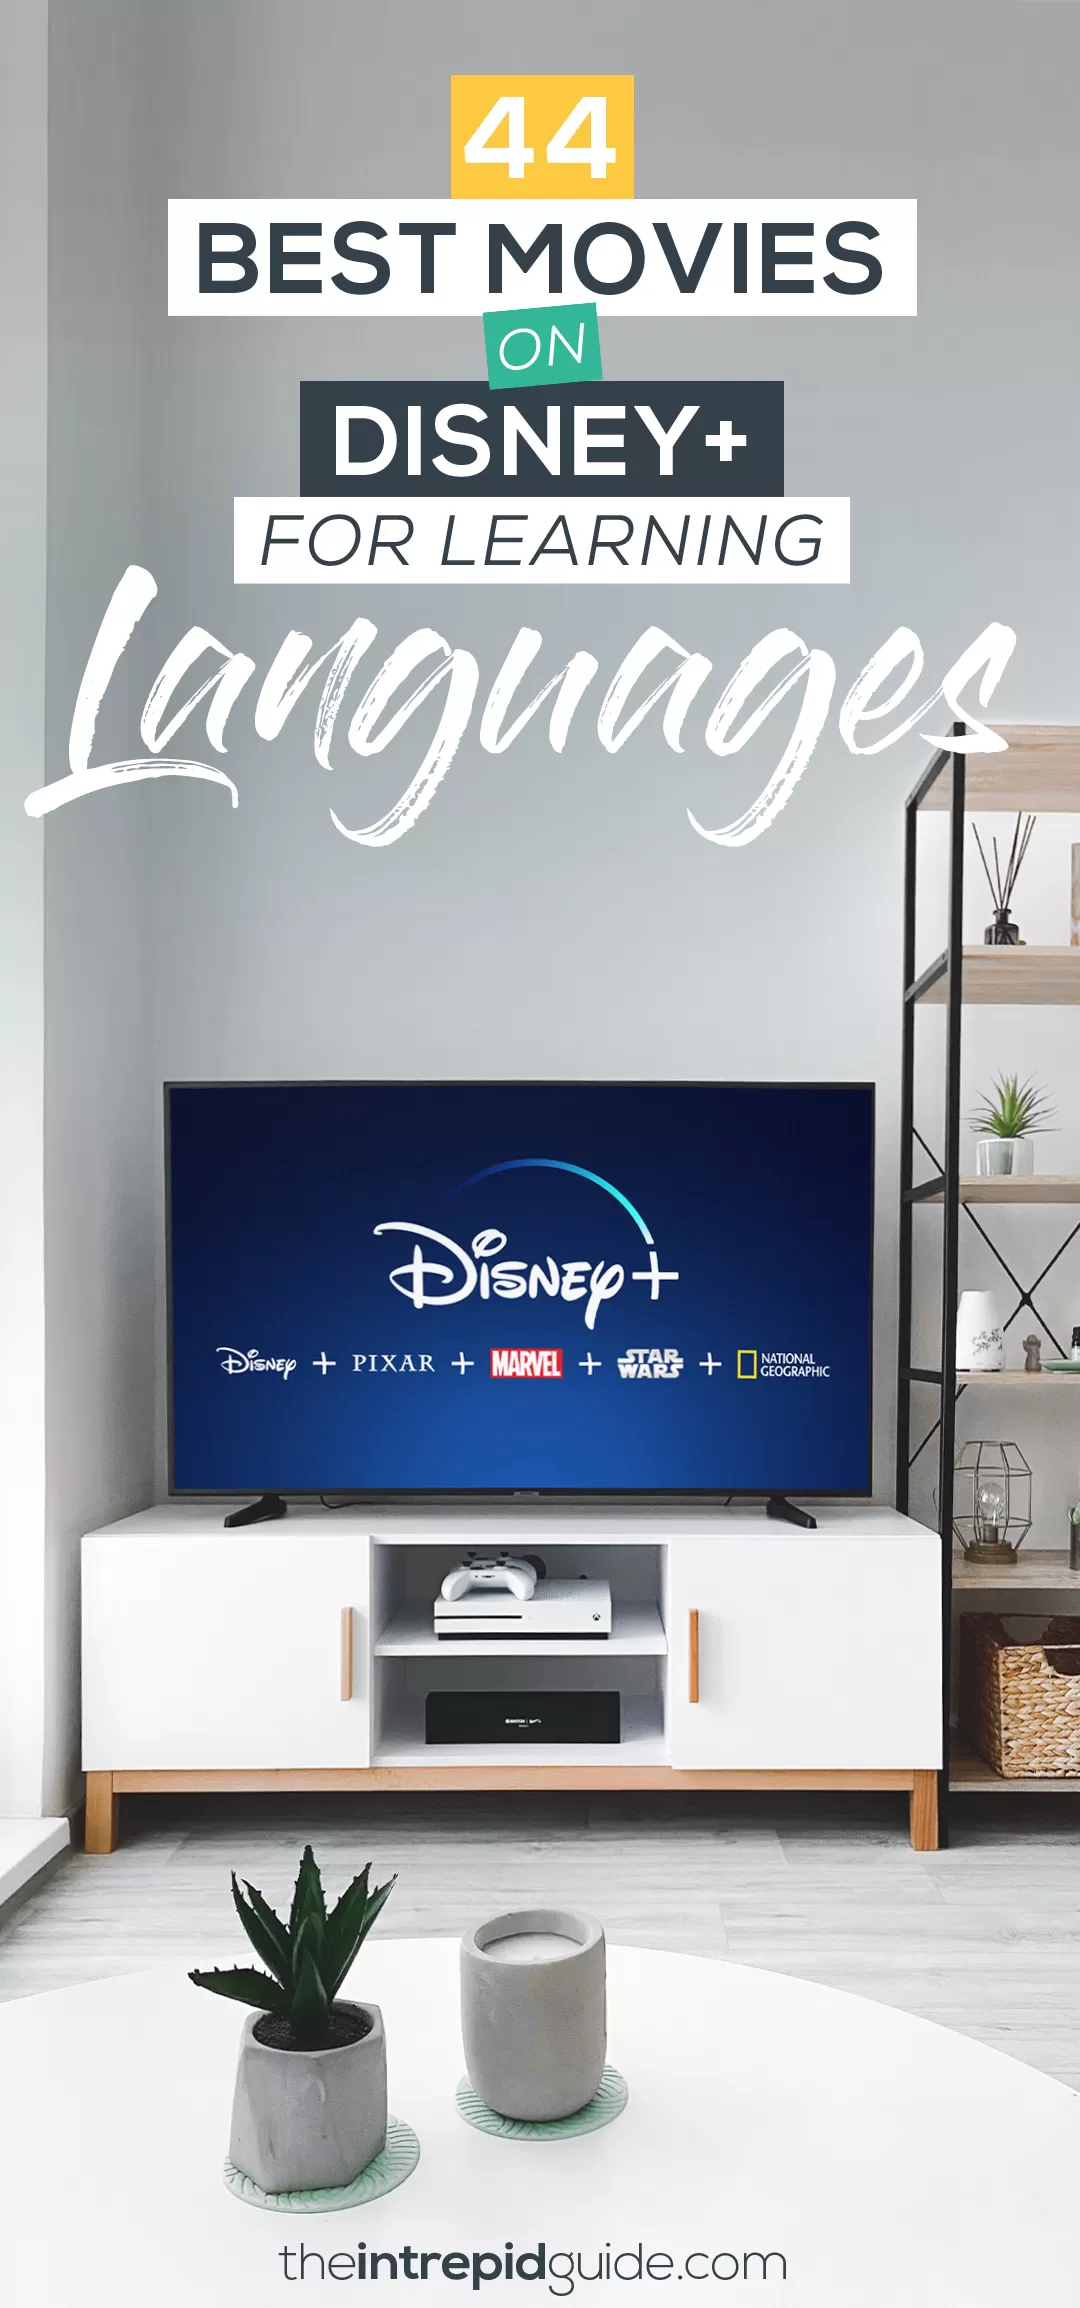 44 Best Movies on Disney Plus for Learning Languages